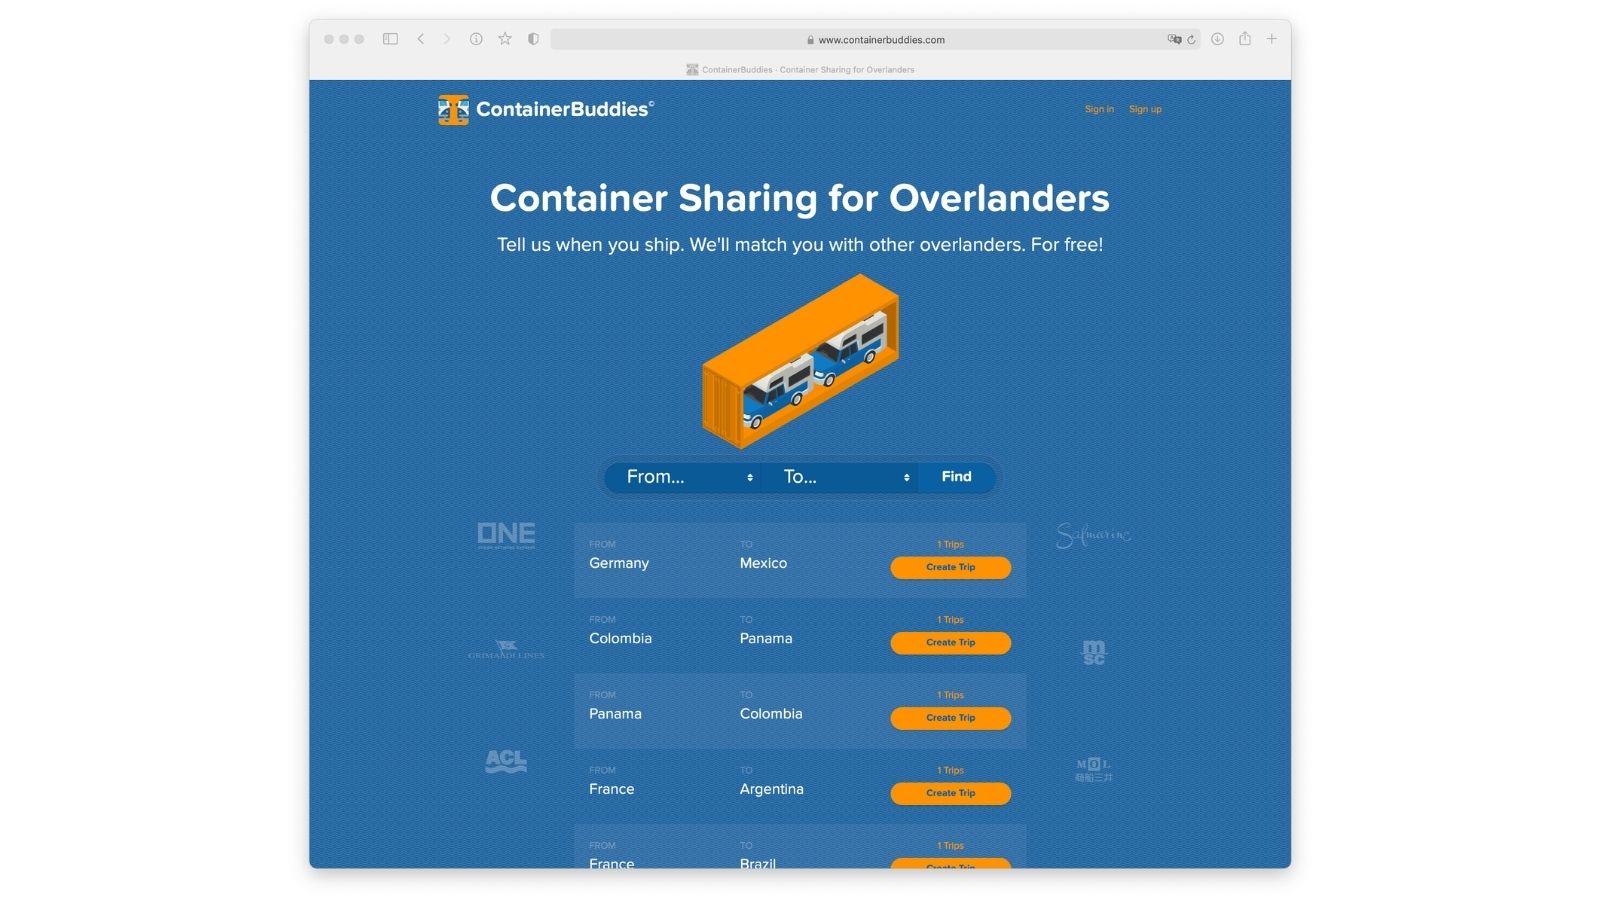 Find detailed information about ContainerBuddies